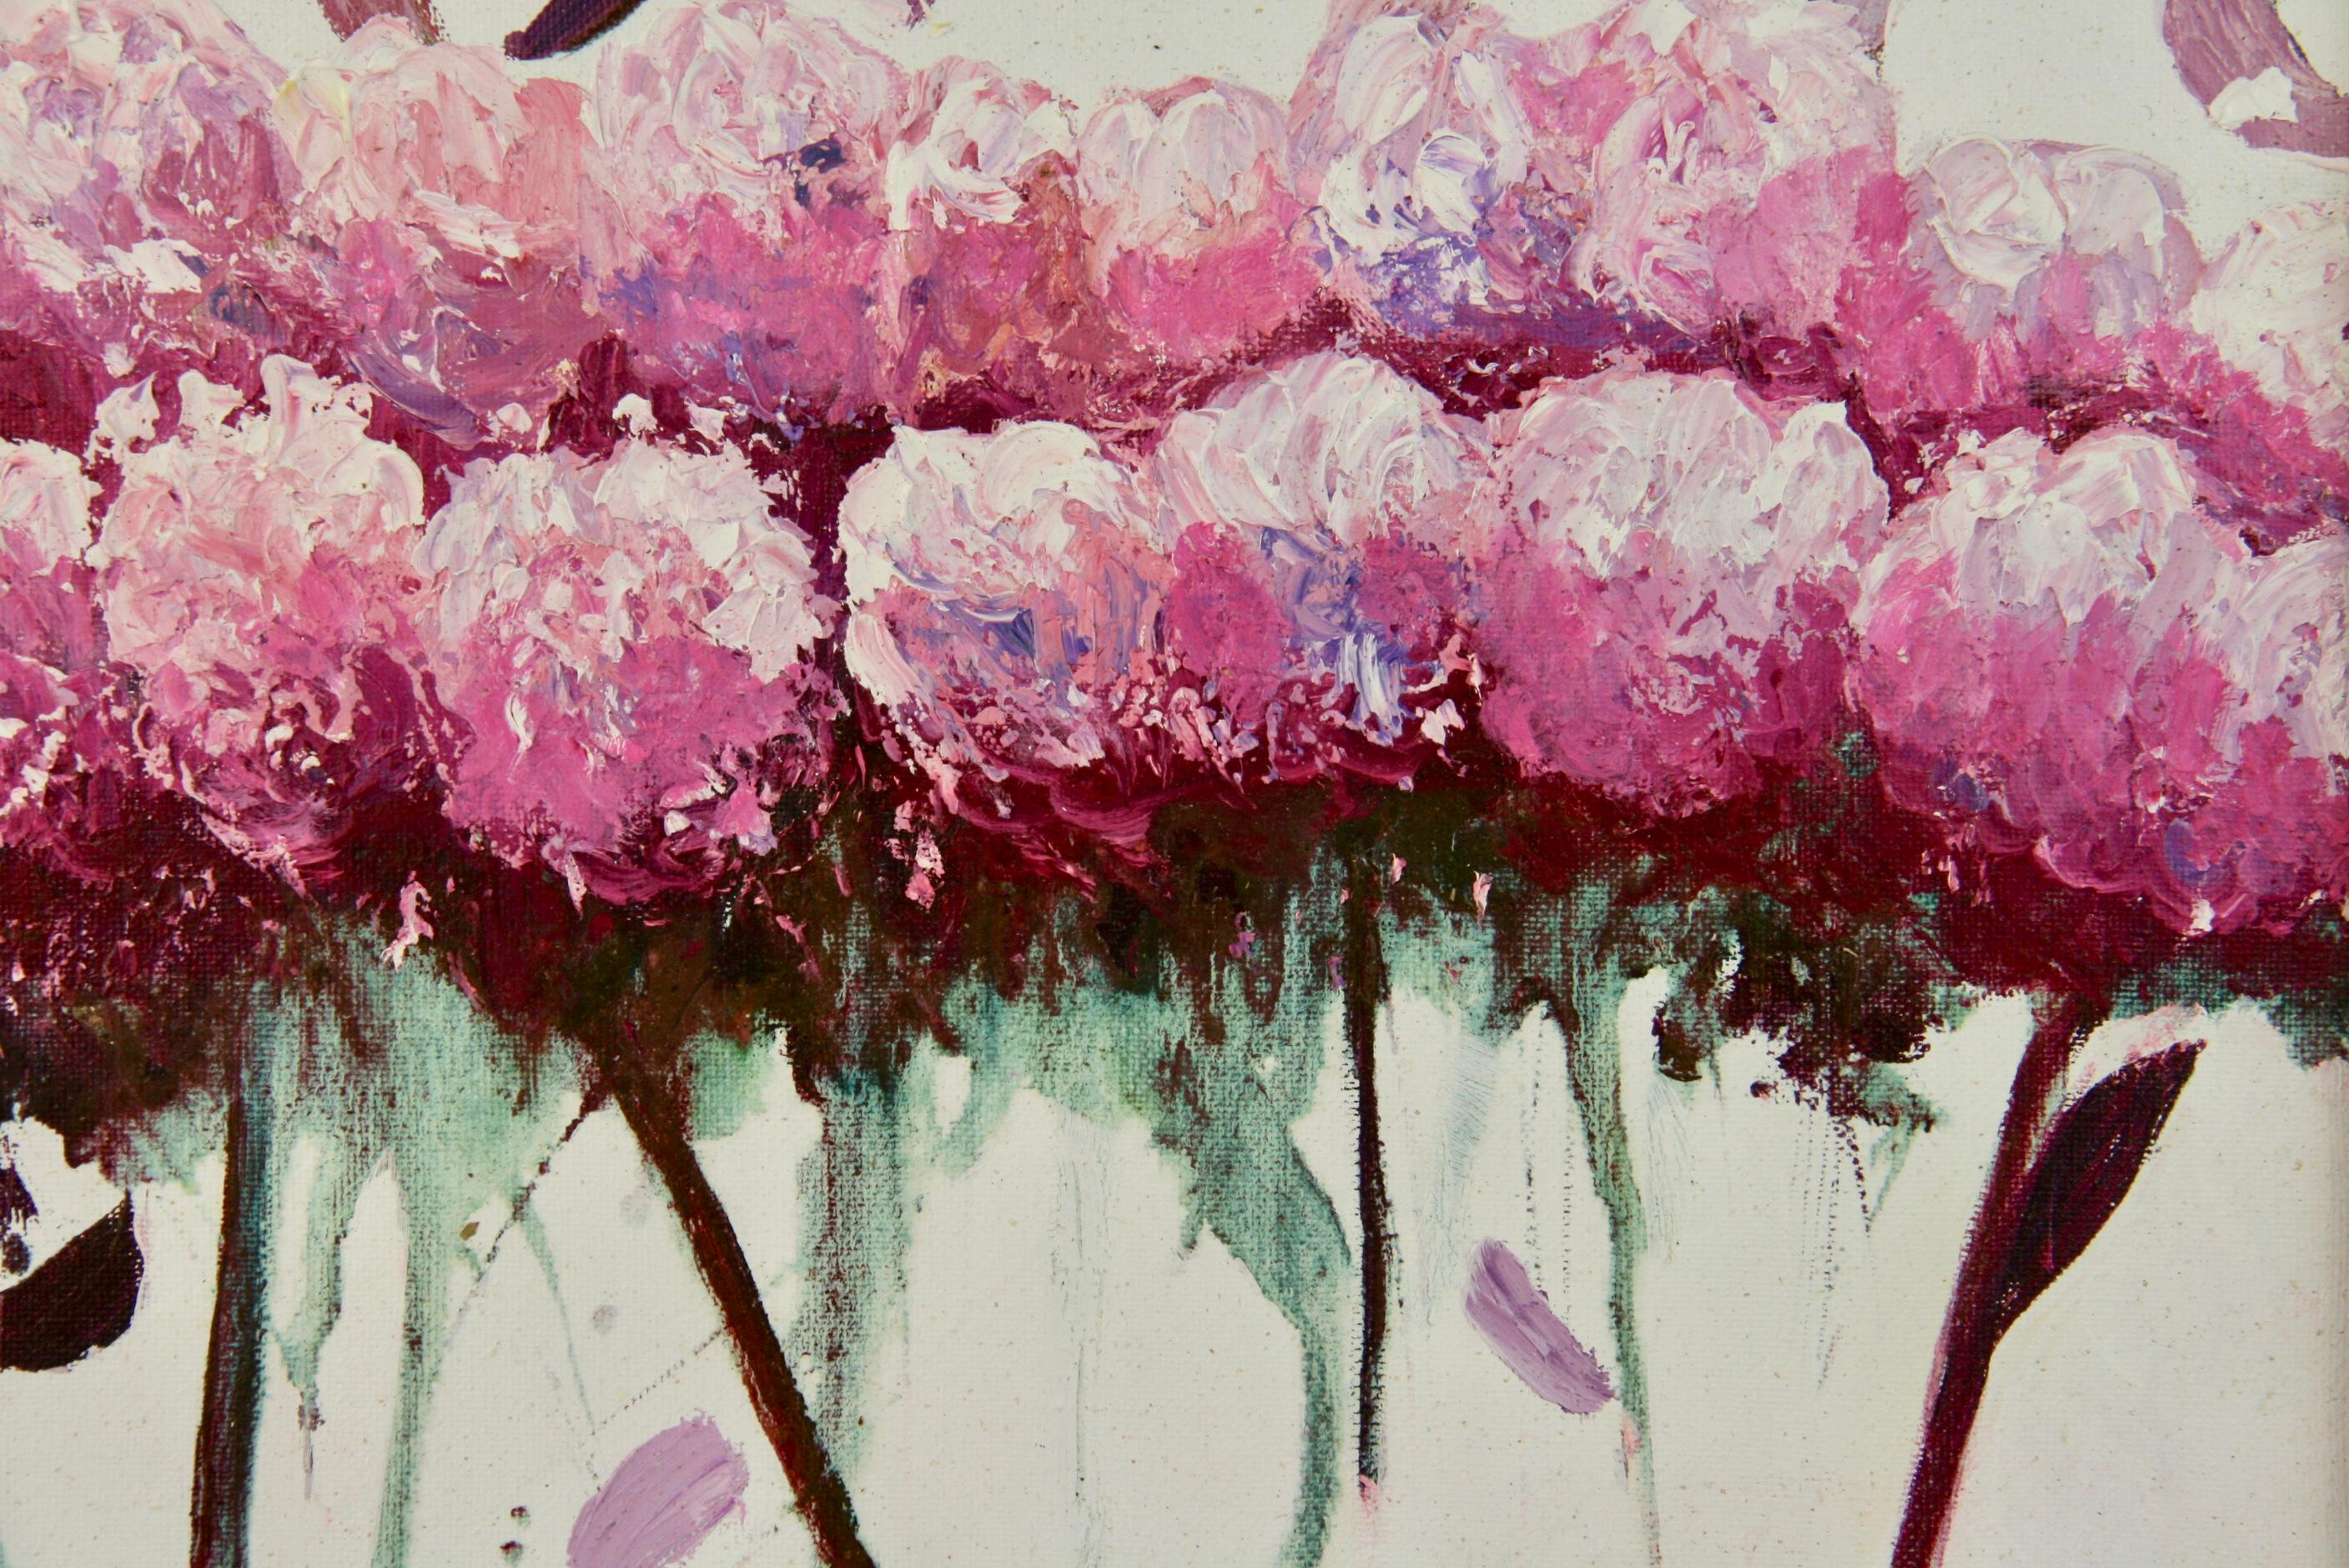 Unknown Abstract Painting - Modern Impressionist Hydrangea Flower Oil Painting by P.Russo